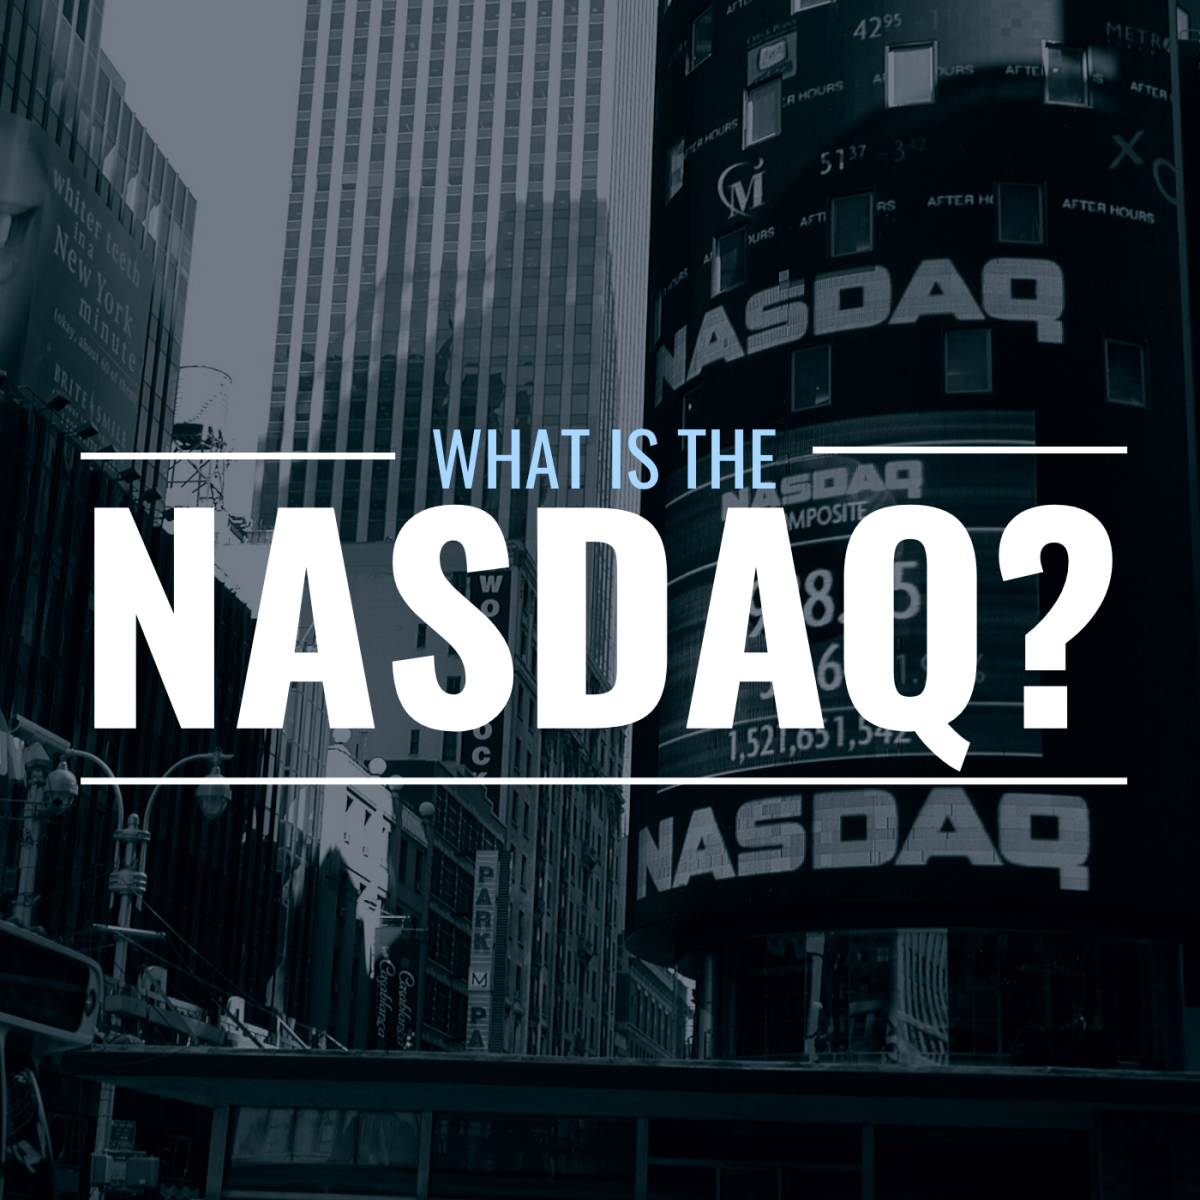 Image of the Nasdaq ticker with text overlay: "What Is the Nasdaq?"